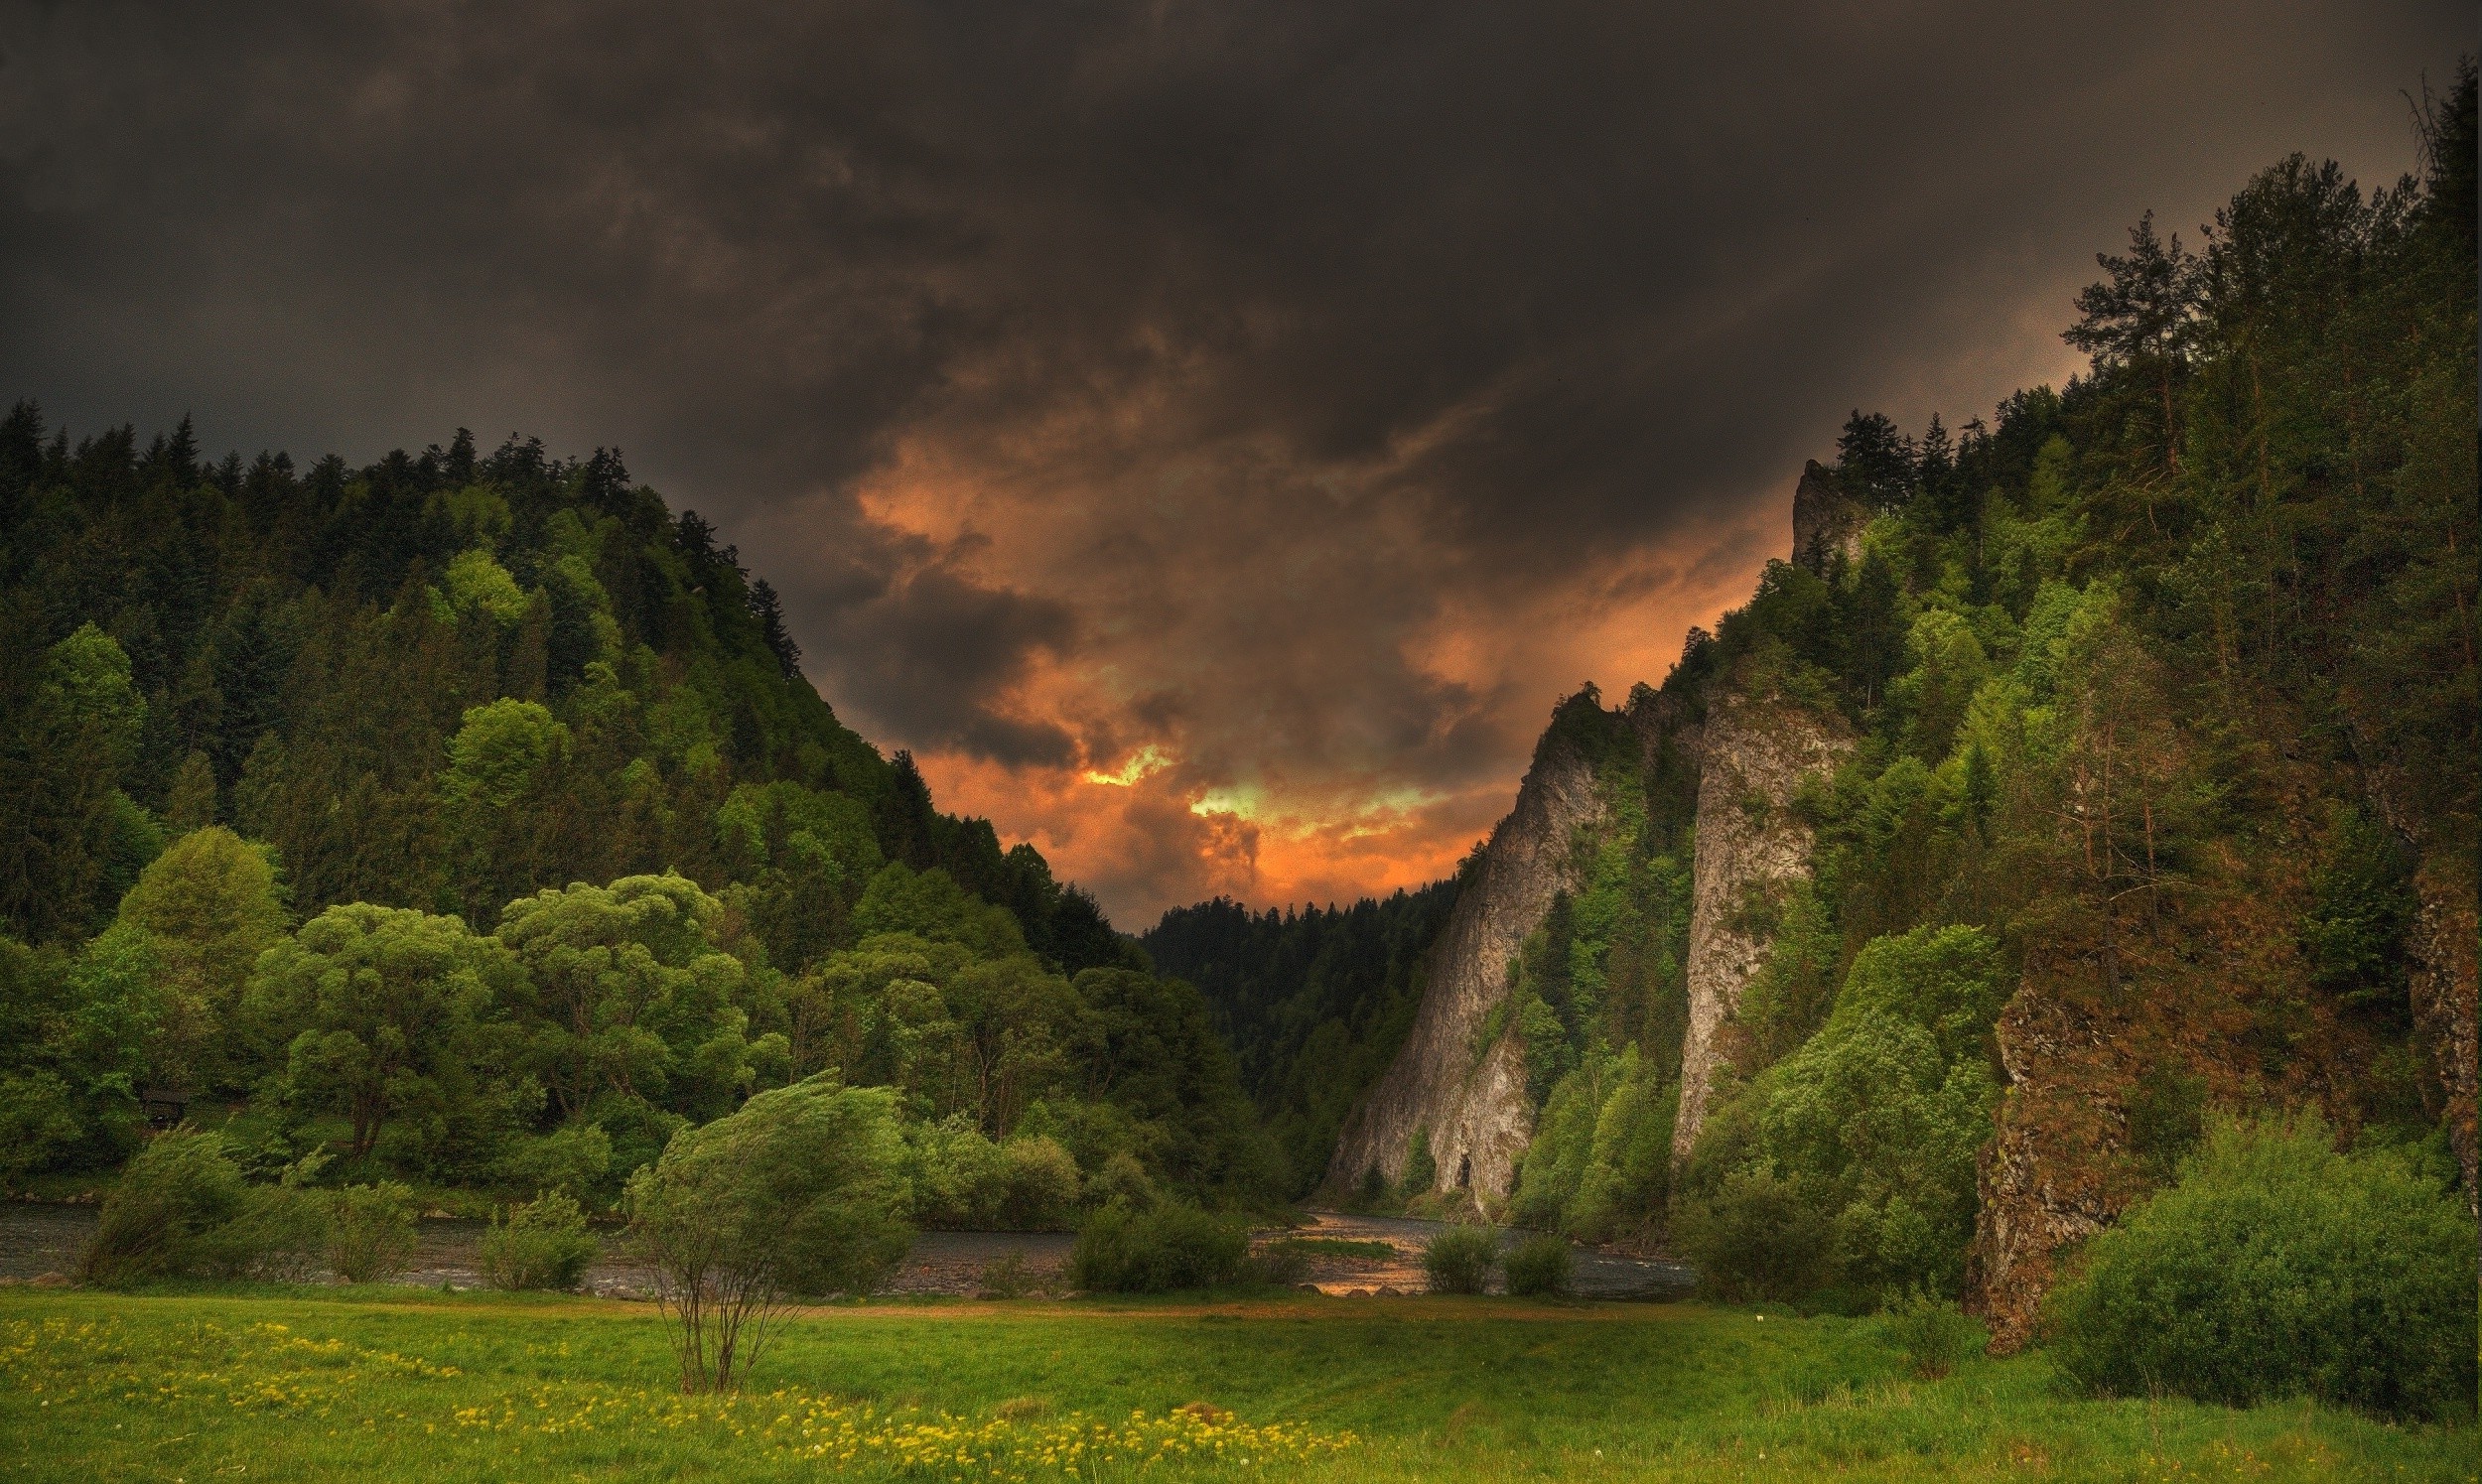 spring, River, Storm, Clouds, Forest, Hill, Trees, Grass, Wildflowers